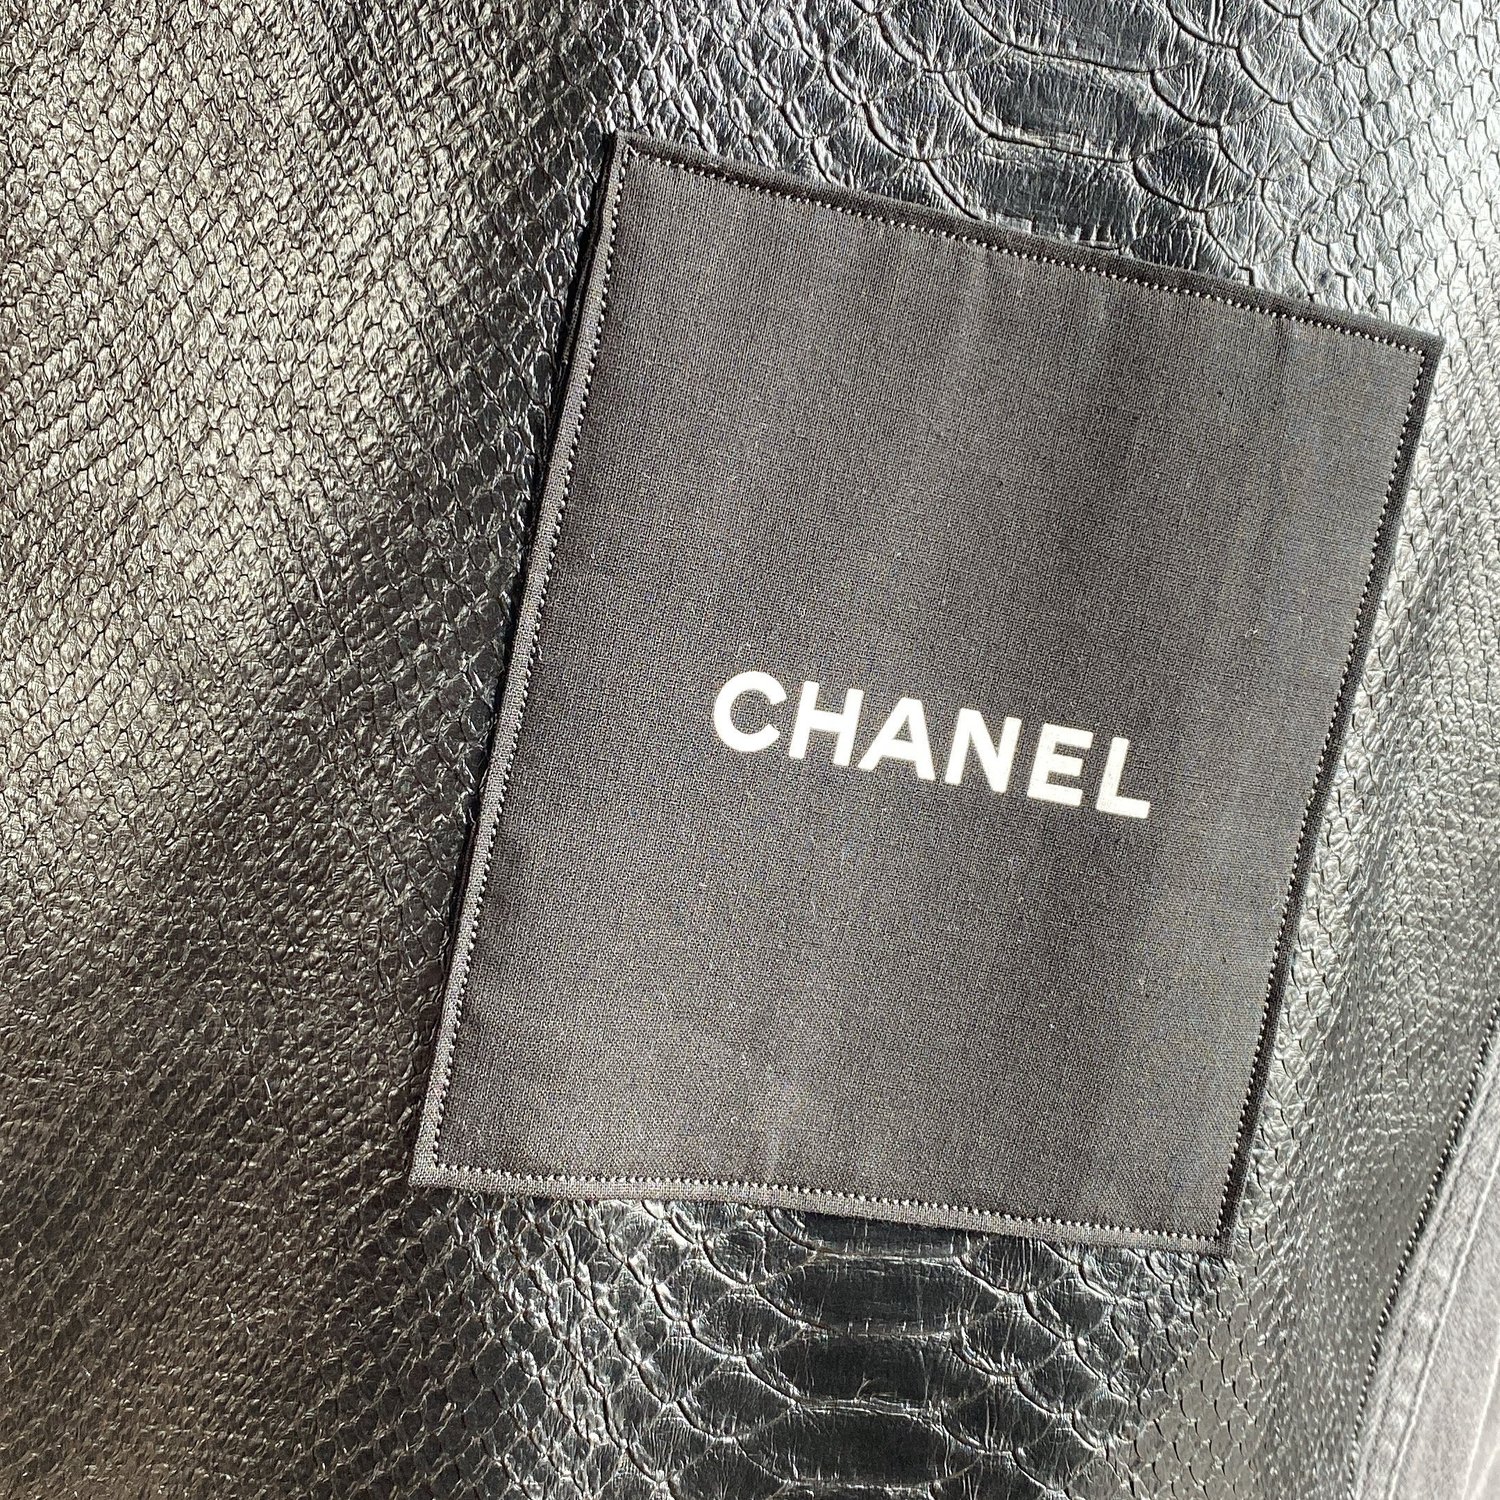 Chanel x Denim Jacket {Made To Order}